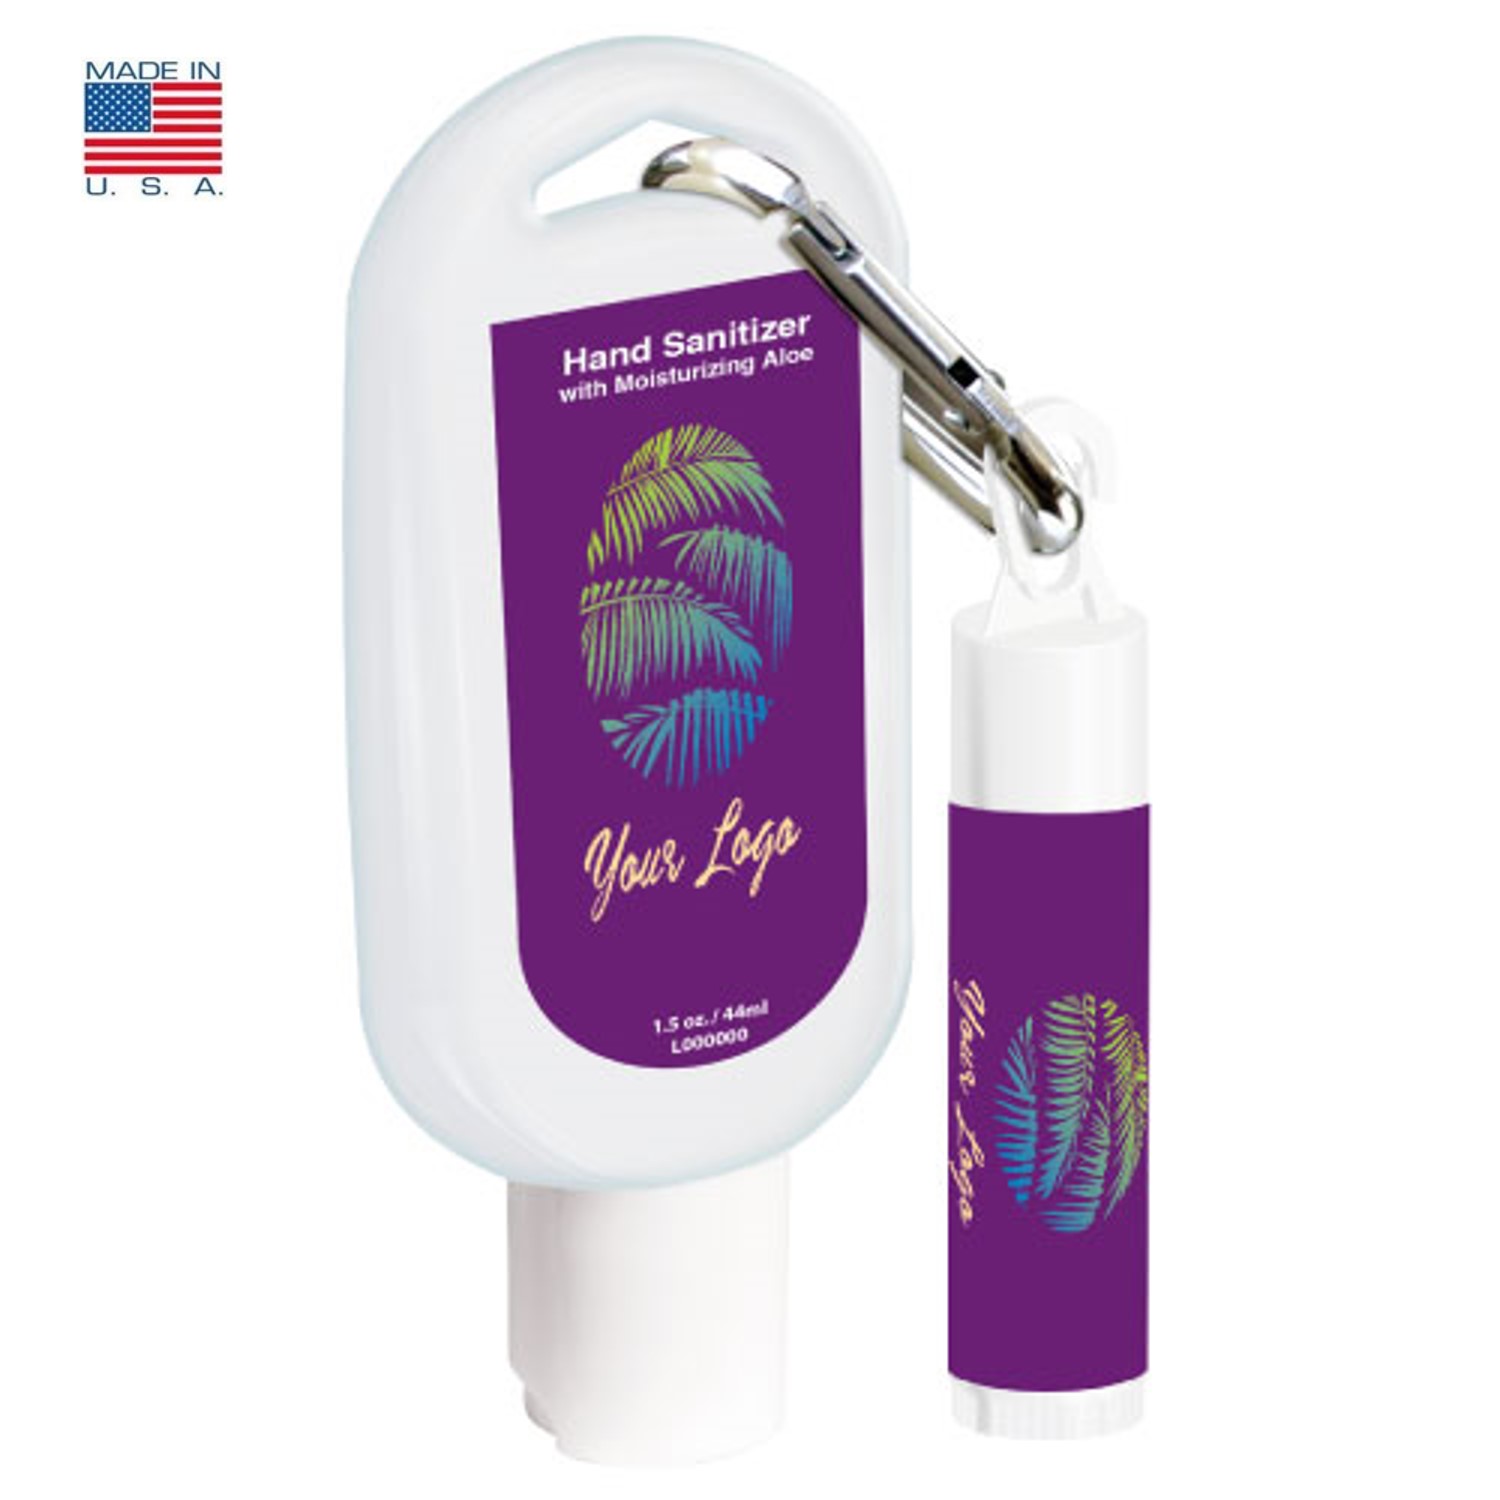 two-in-one hand sanitizer and lip balm in violet color